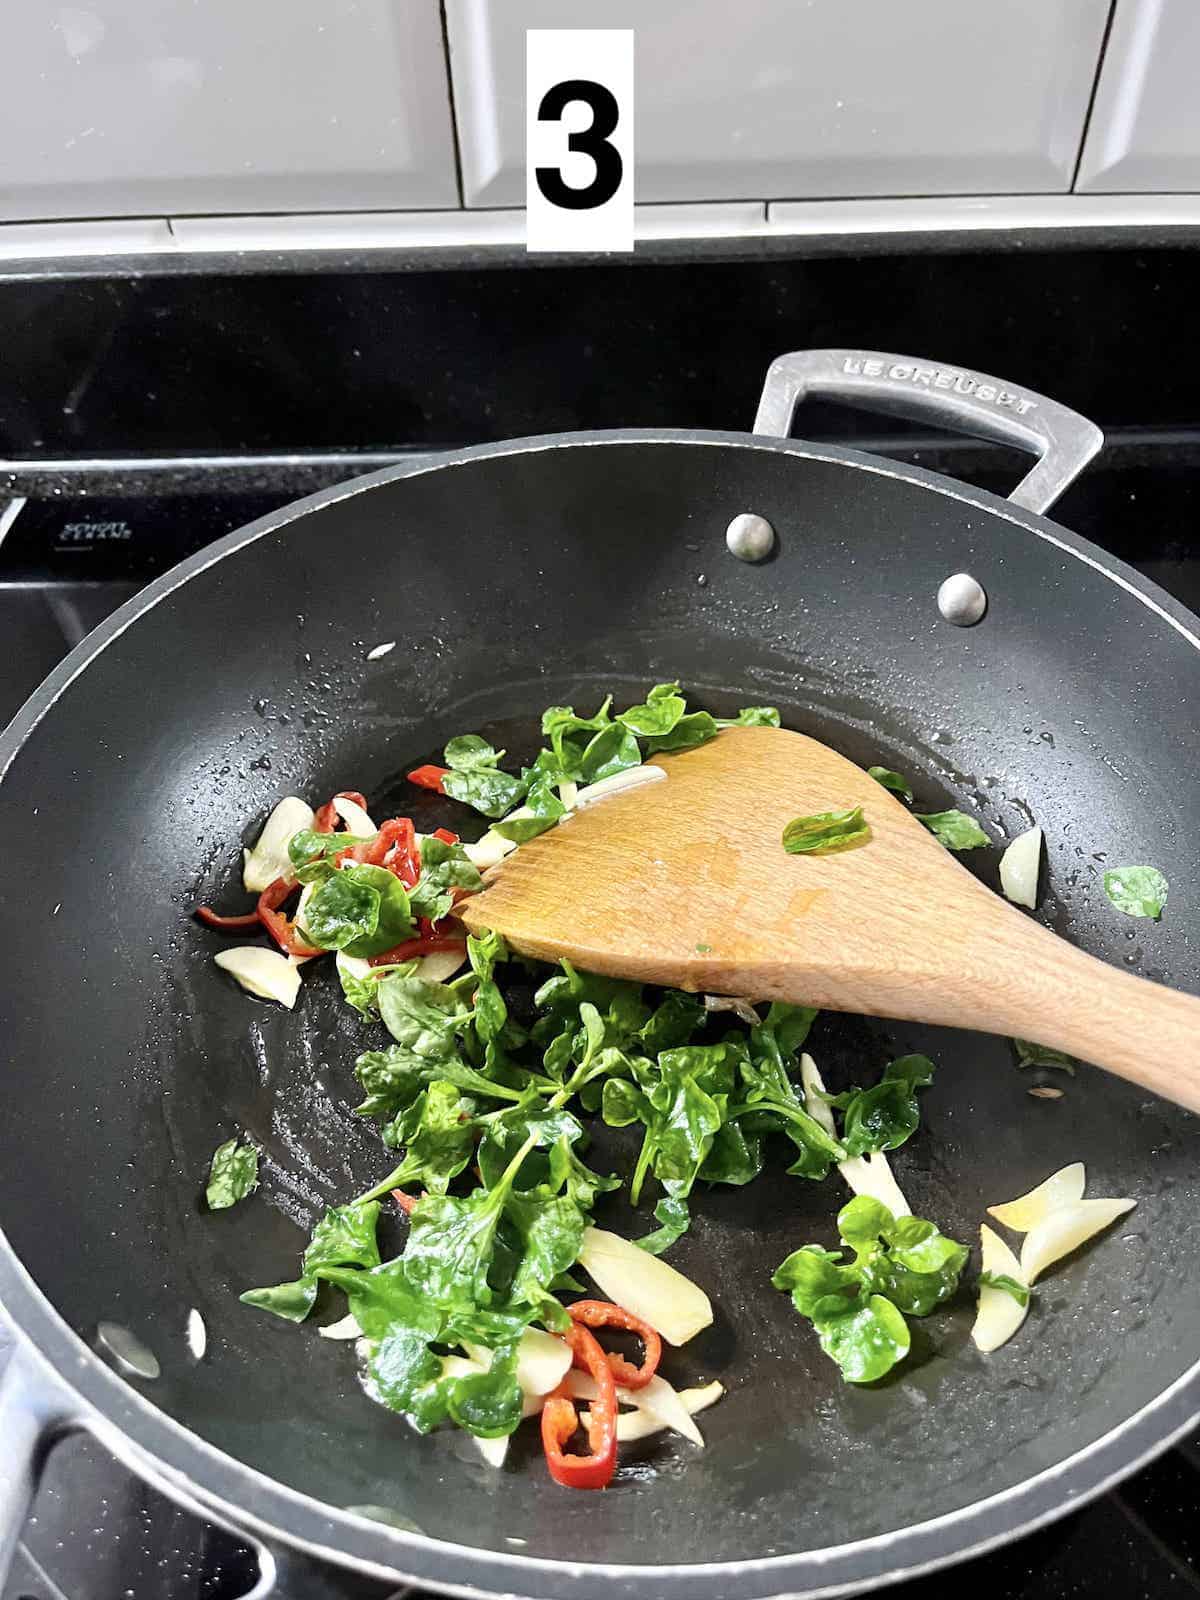 Stir-frying Brazilian spinach with garlic and chili.